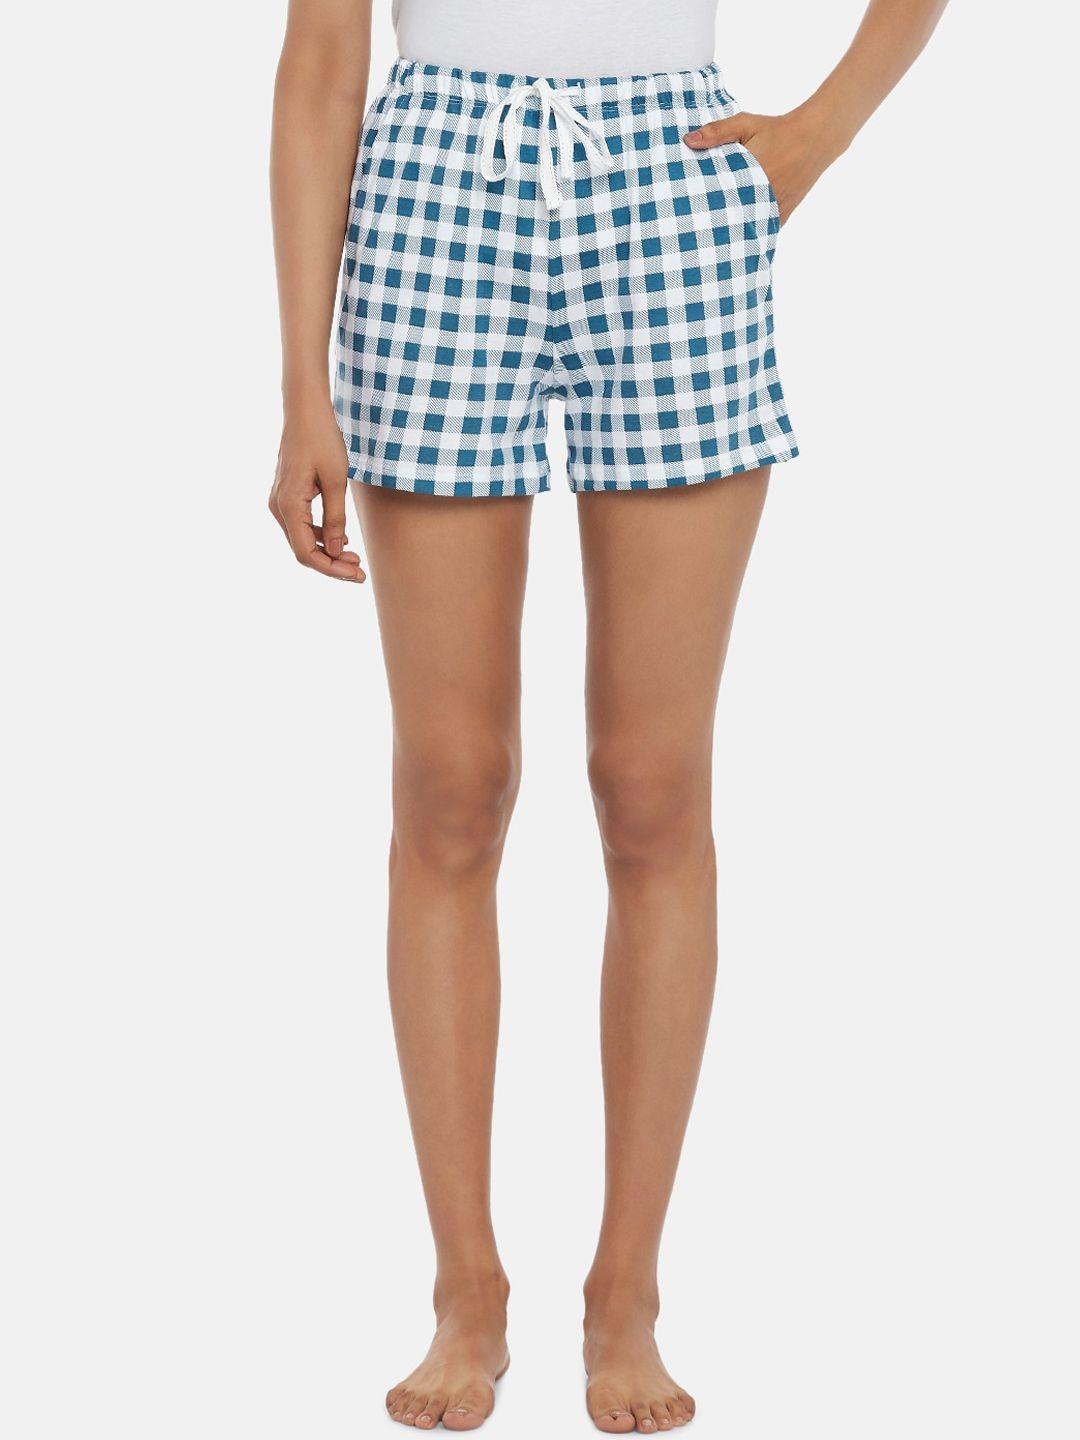 dreamz-by-pantaloons-women-teal-checked-lounge-shorts